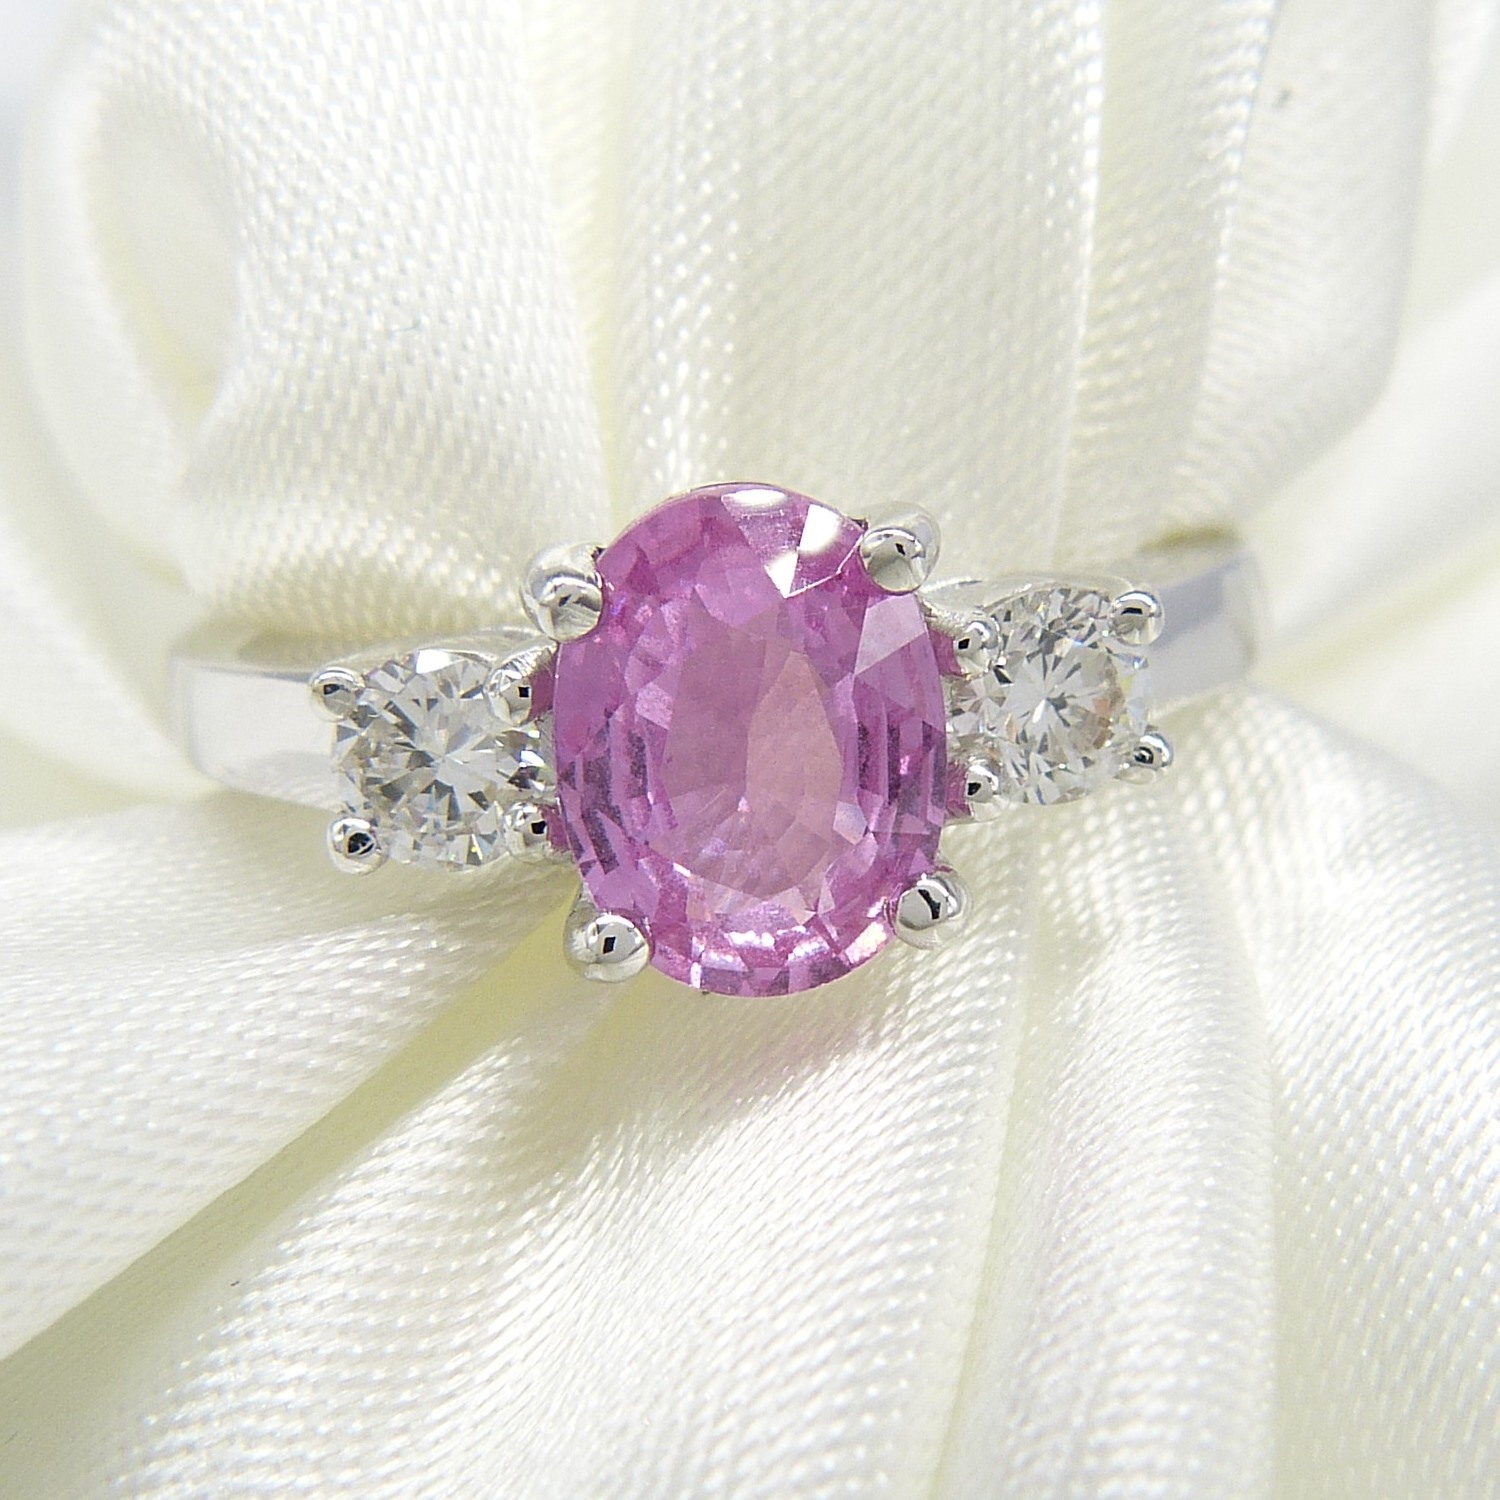 1.50 carat pink sapphire and 0.35 carat diamond 3-stone dress ring in 18ct white gold - Image 4 of 8